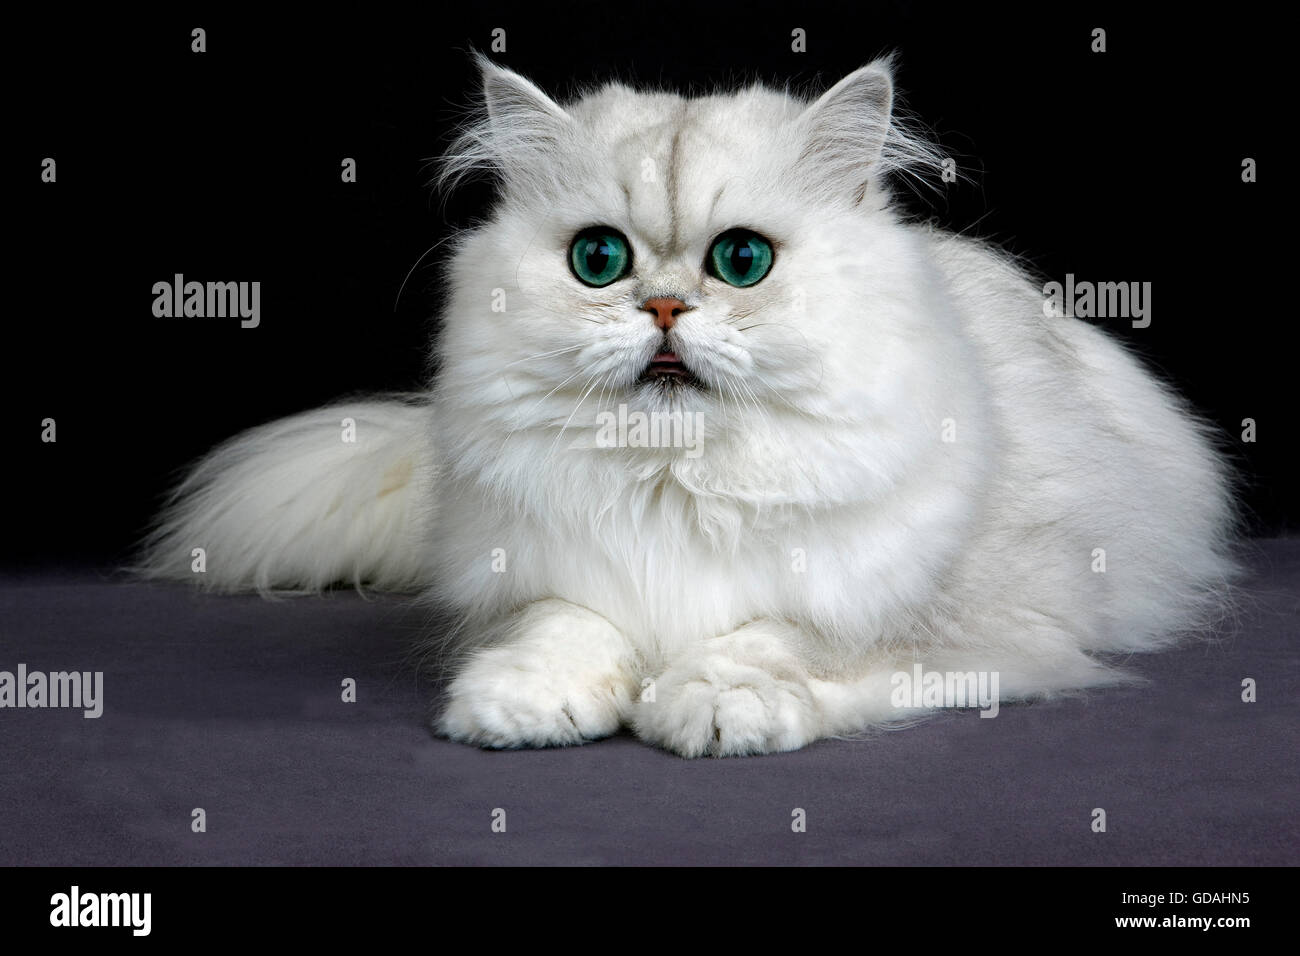 CHINCHILLA PERSIAN CAT, ADULT WITH GREEN EYES Stock Photo